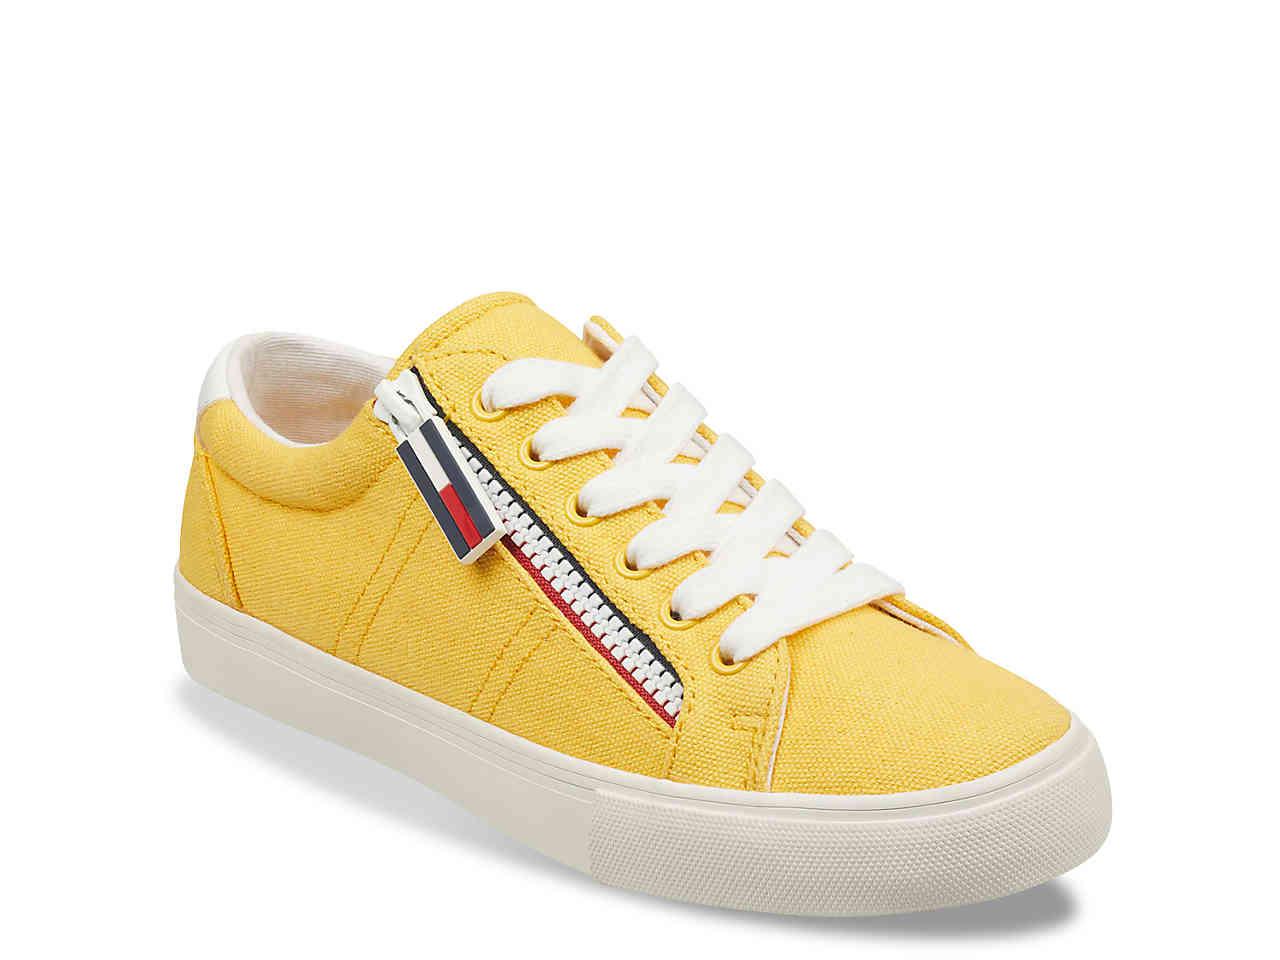 Tommy Hilfiger Shoes Yellow Greece, SAVE 41% - crossfit-sdg.com